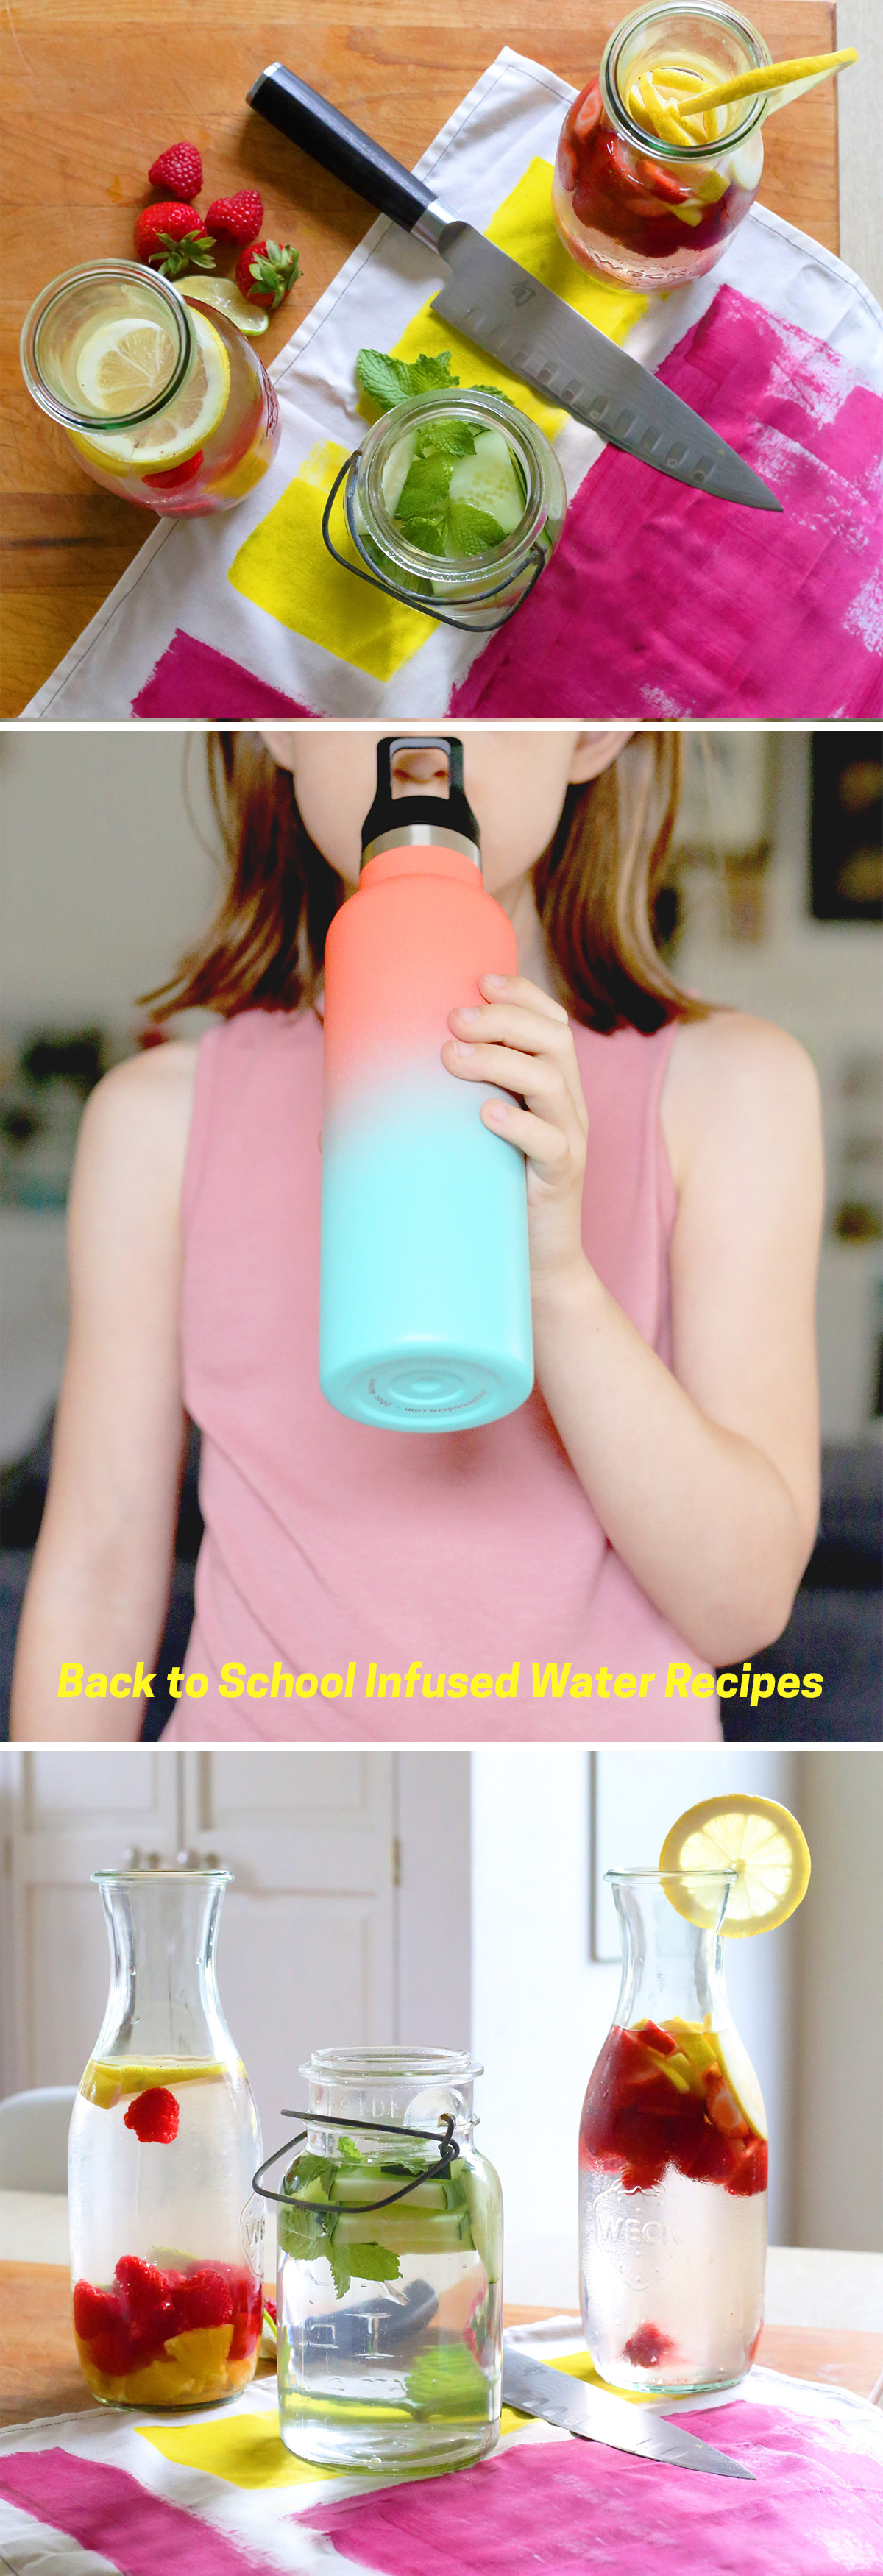 Back to School Infused Water Recipes for Kids Collage